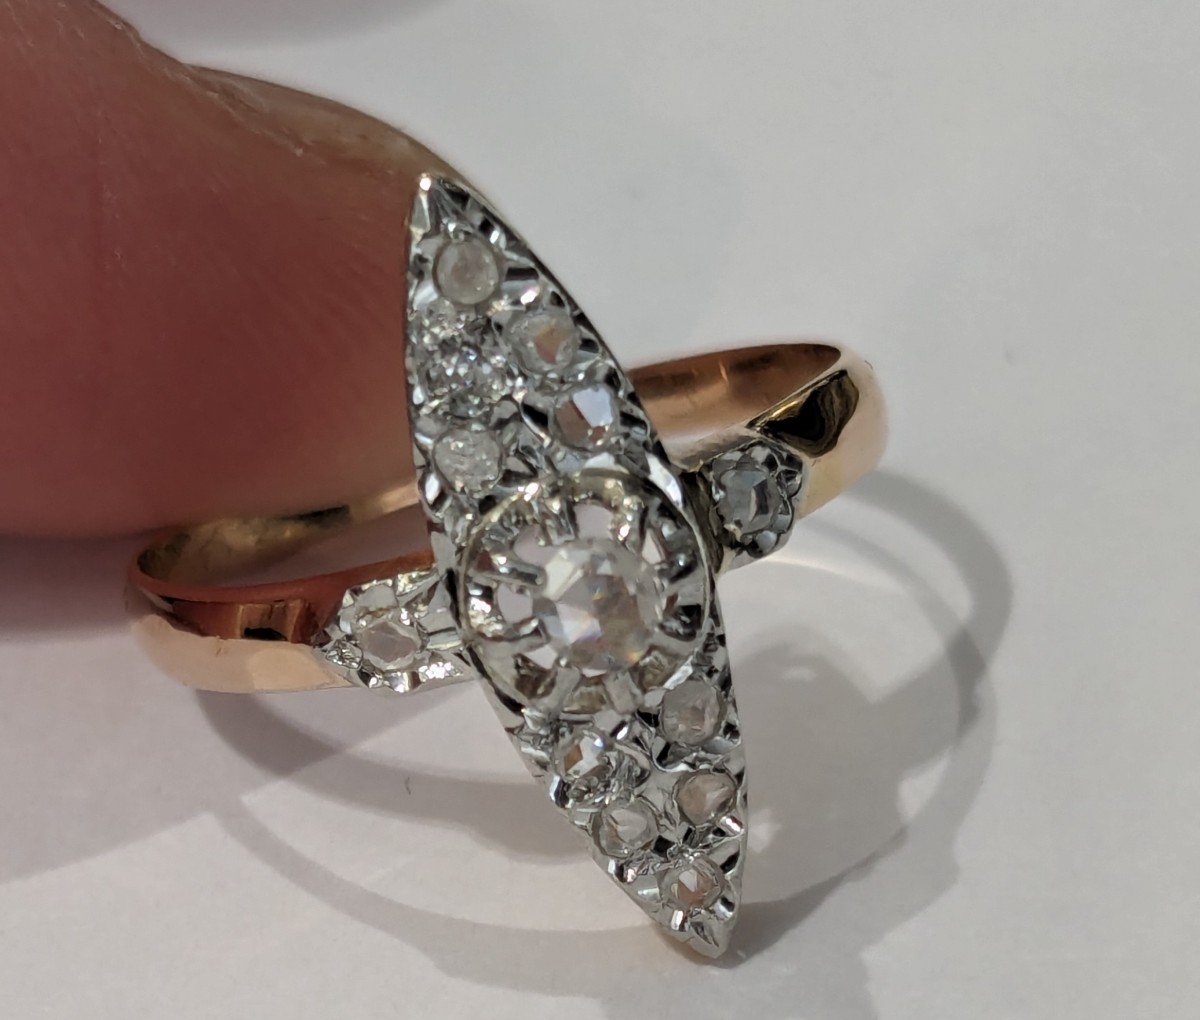 Small Marquise Ring In Gold, Platinum And Diamonds, 1900 Period-photo-3